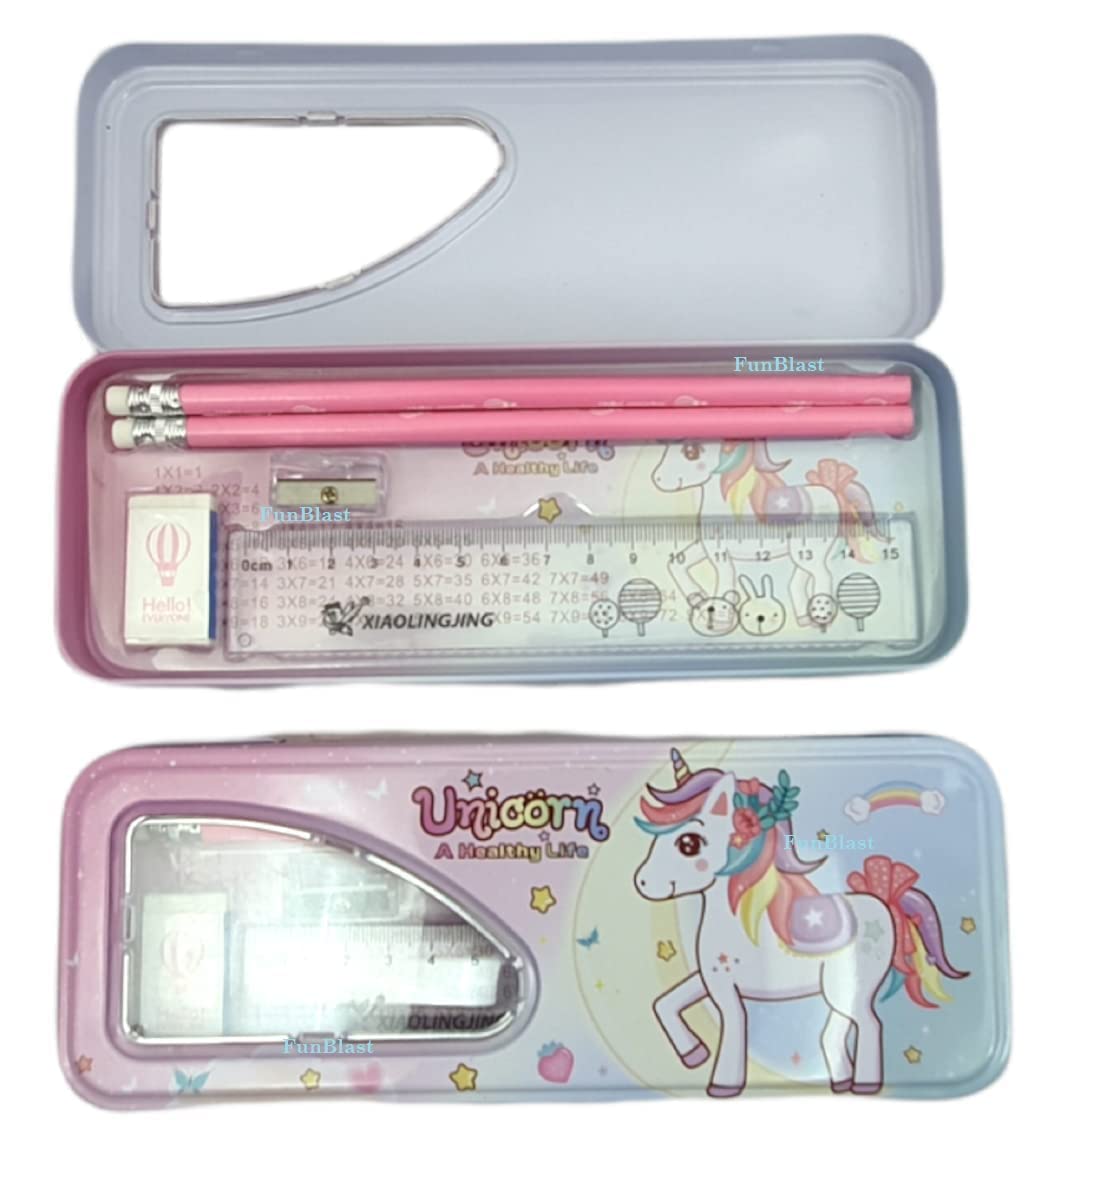  Gifting Bells Unicorn Pencil Case for Girls